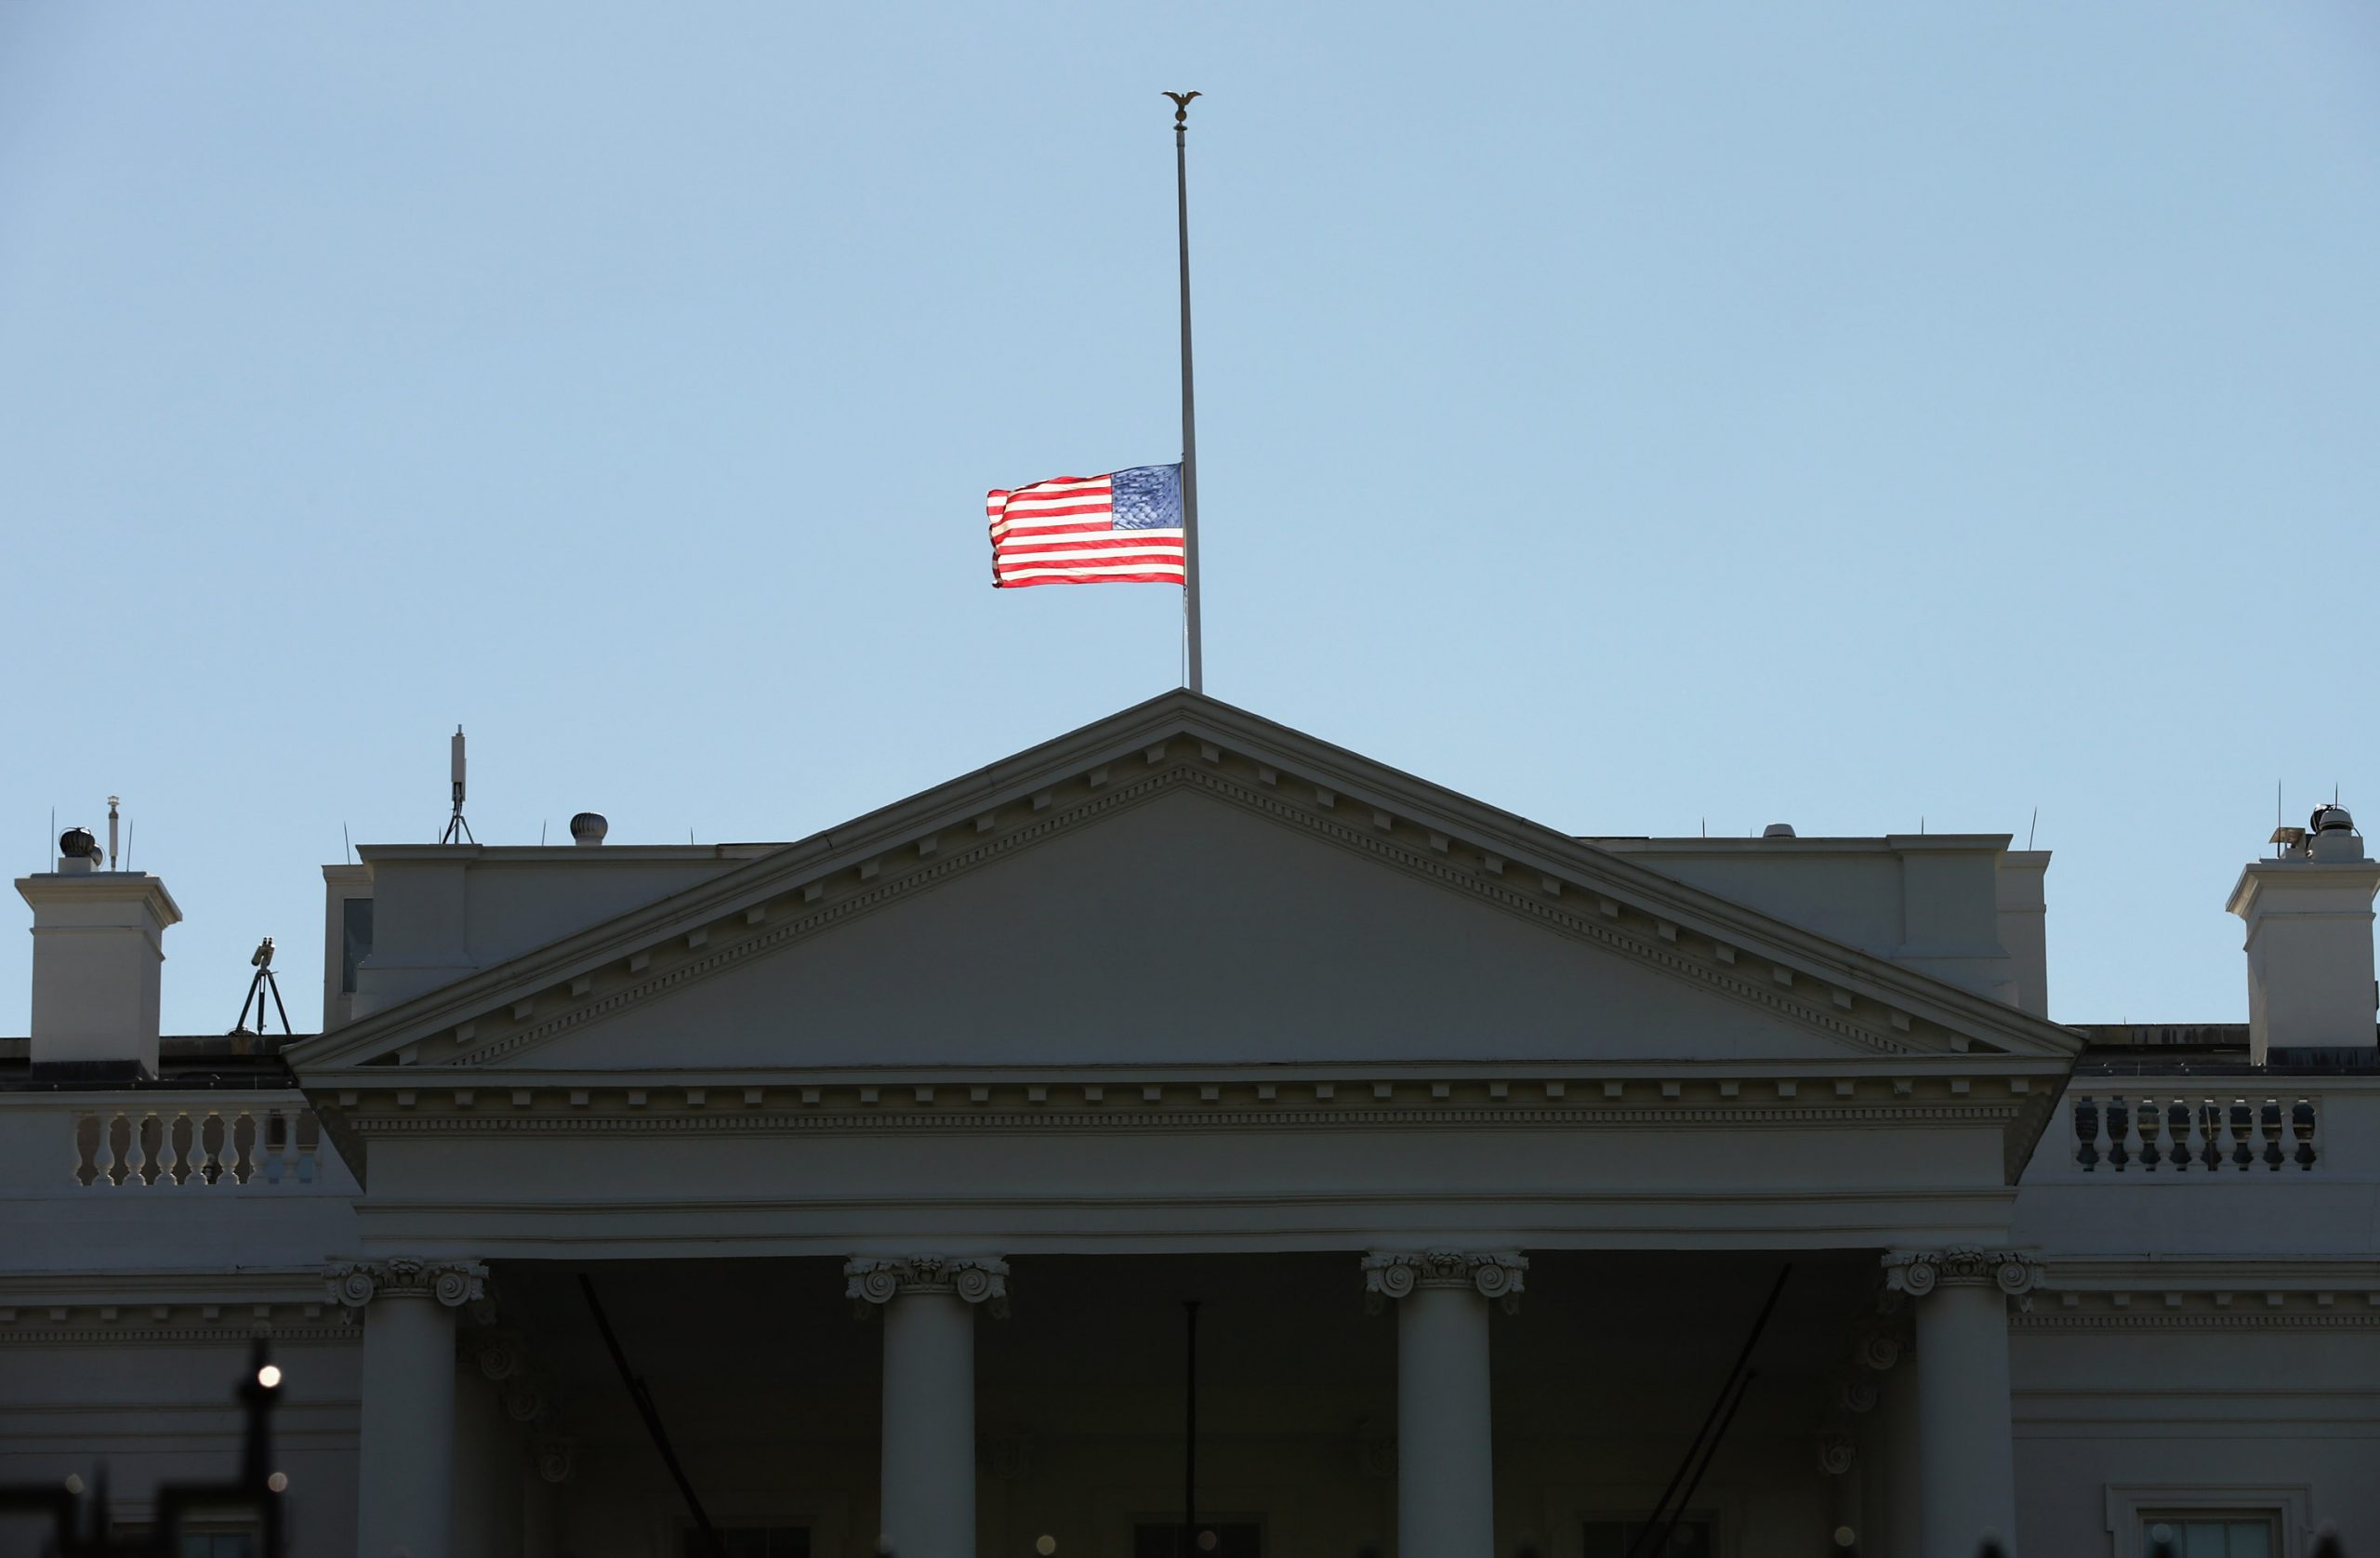 The American flag flys at half-staff above the White House December 3, 2015 in Washington, DC. U.S. President Barack Obama signed a proclaimation ordering all flags to be flown at half-staff to honor the victims of Wednesday's mass shooting in San Bernardino, California. (Photo by Chip Somodevilla/Getty Images)